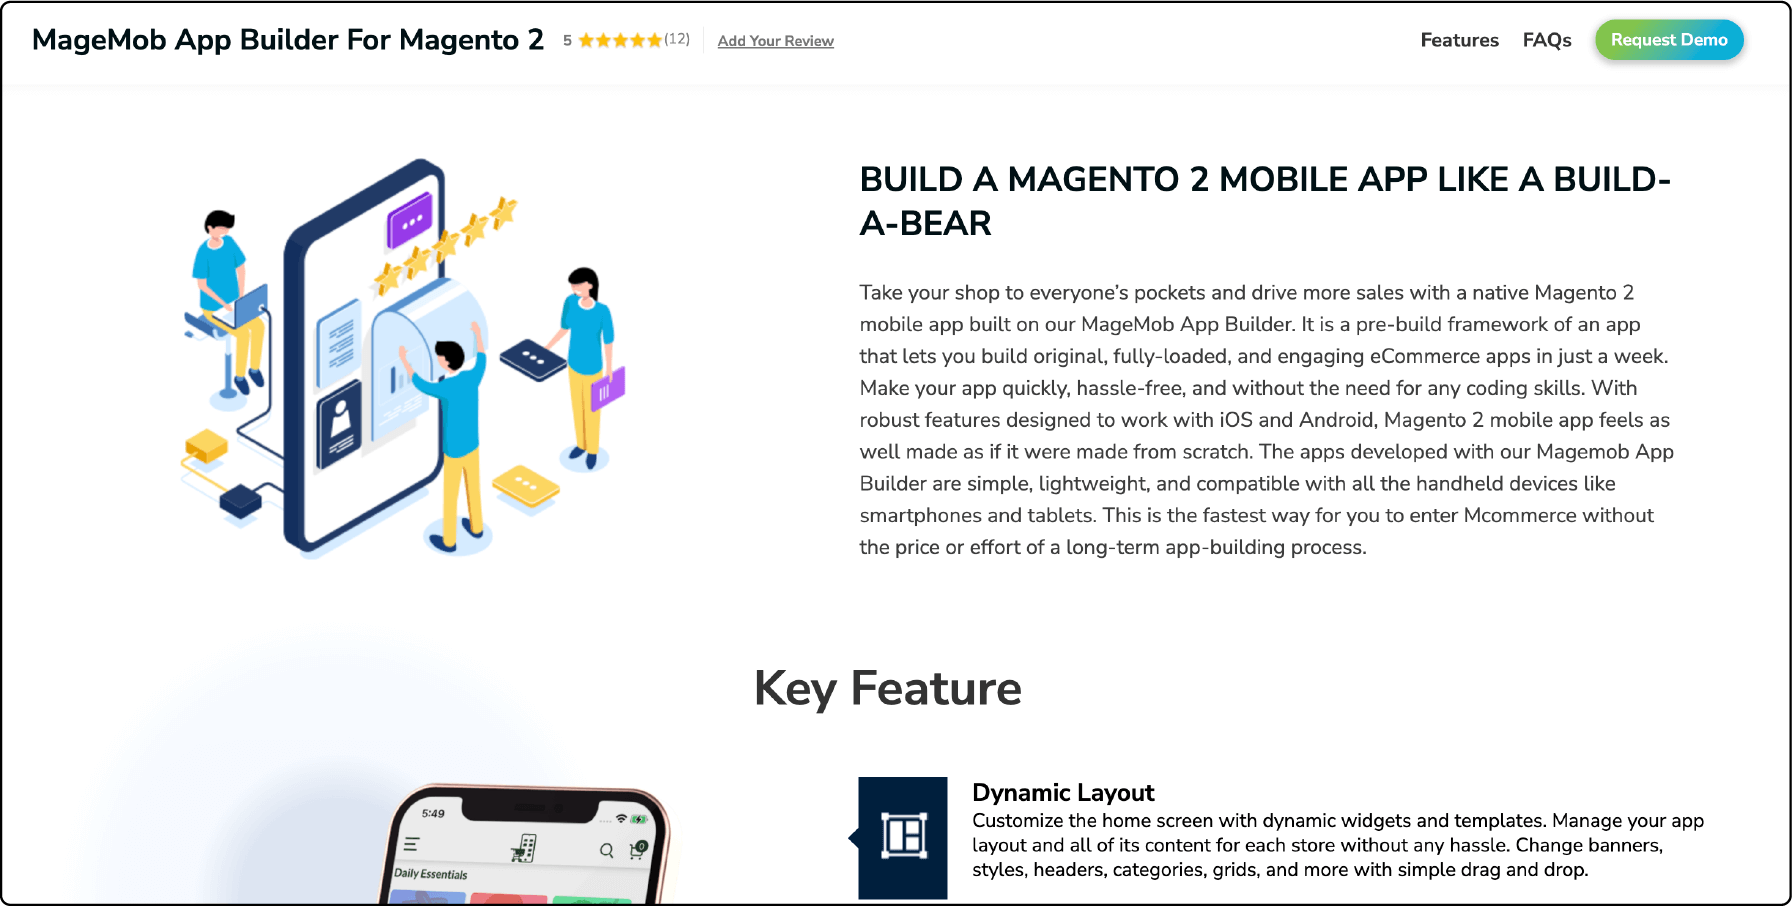 MageMob App Builder interface for Magento 2 by AppJetty